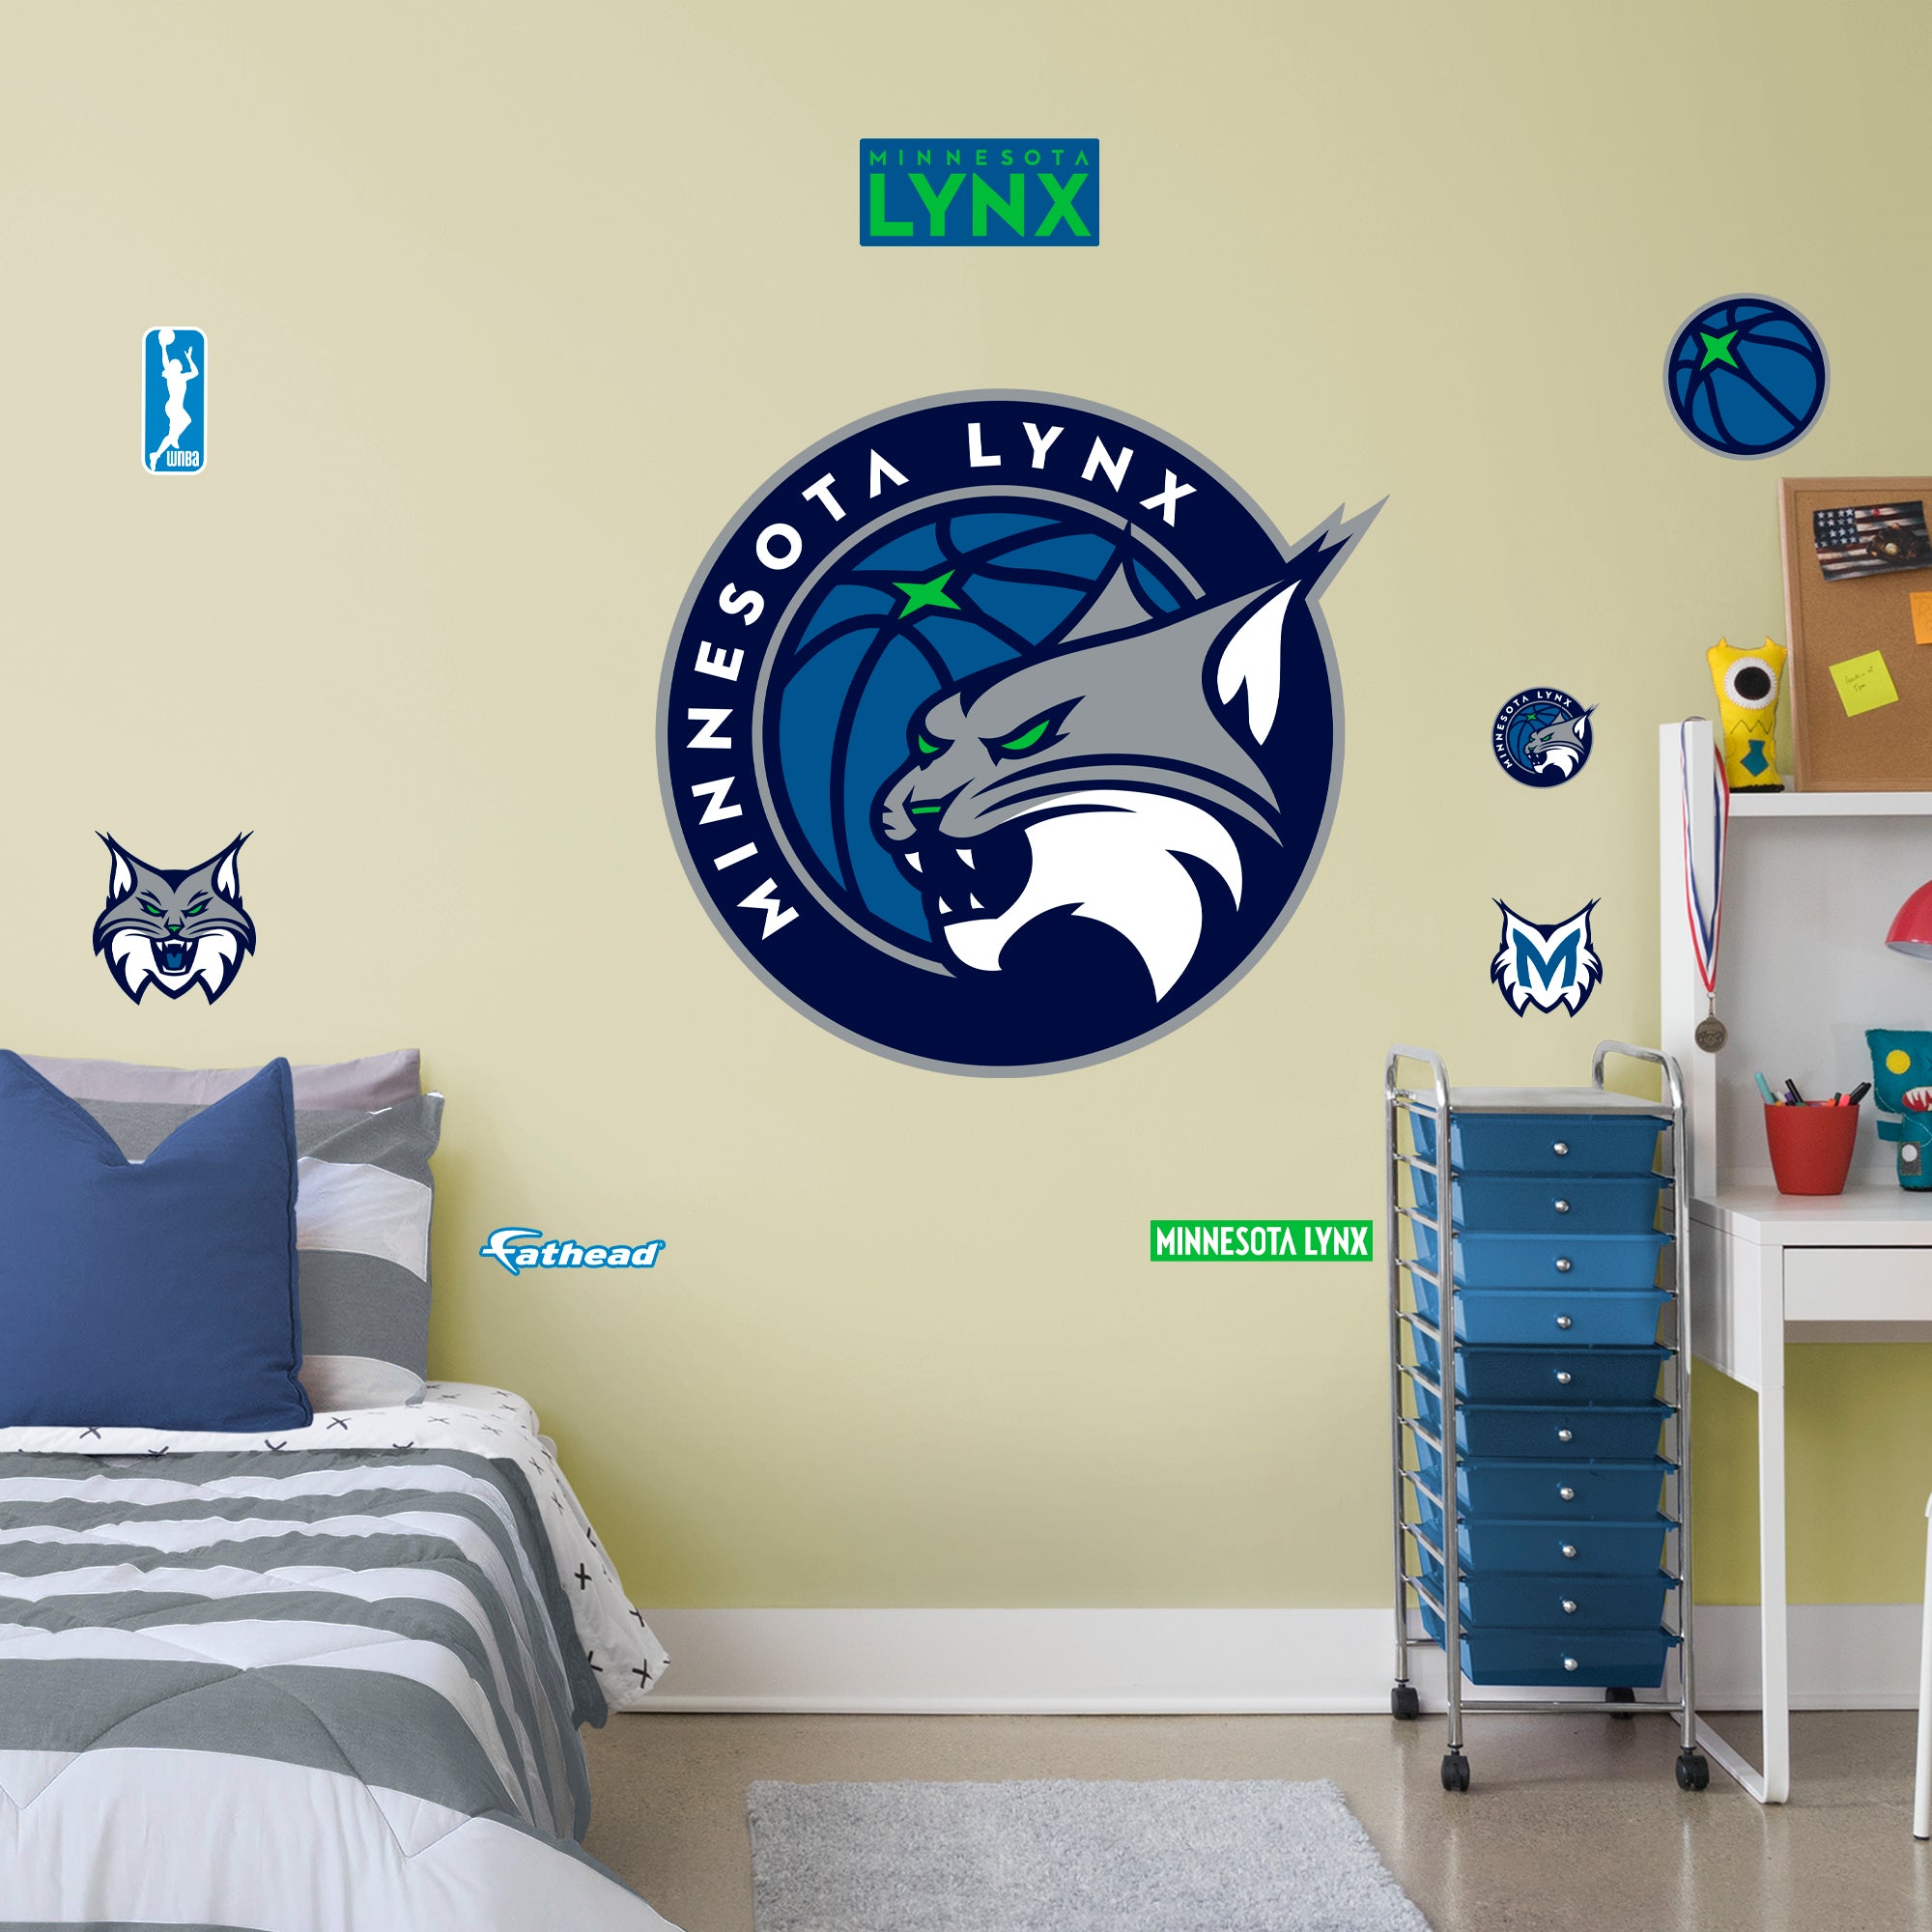 Minnesota Lynx: Logo - Officially Licensed WNBA Removable Wall Decal Giant + 8 Decals by Fathead | Vinyl